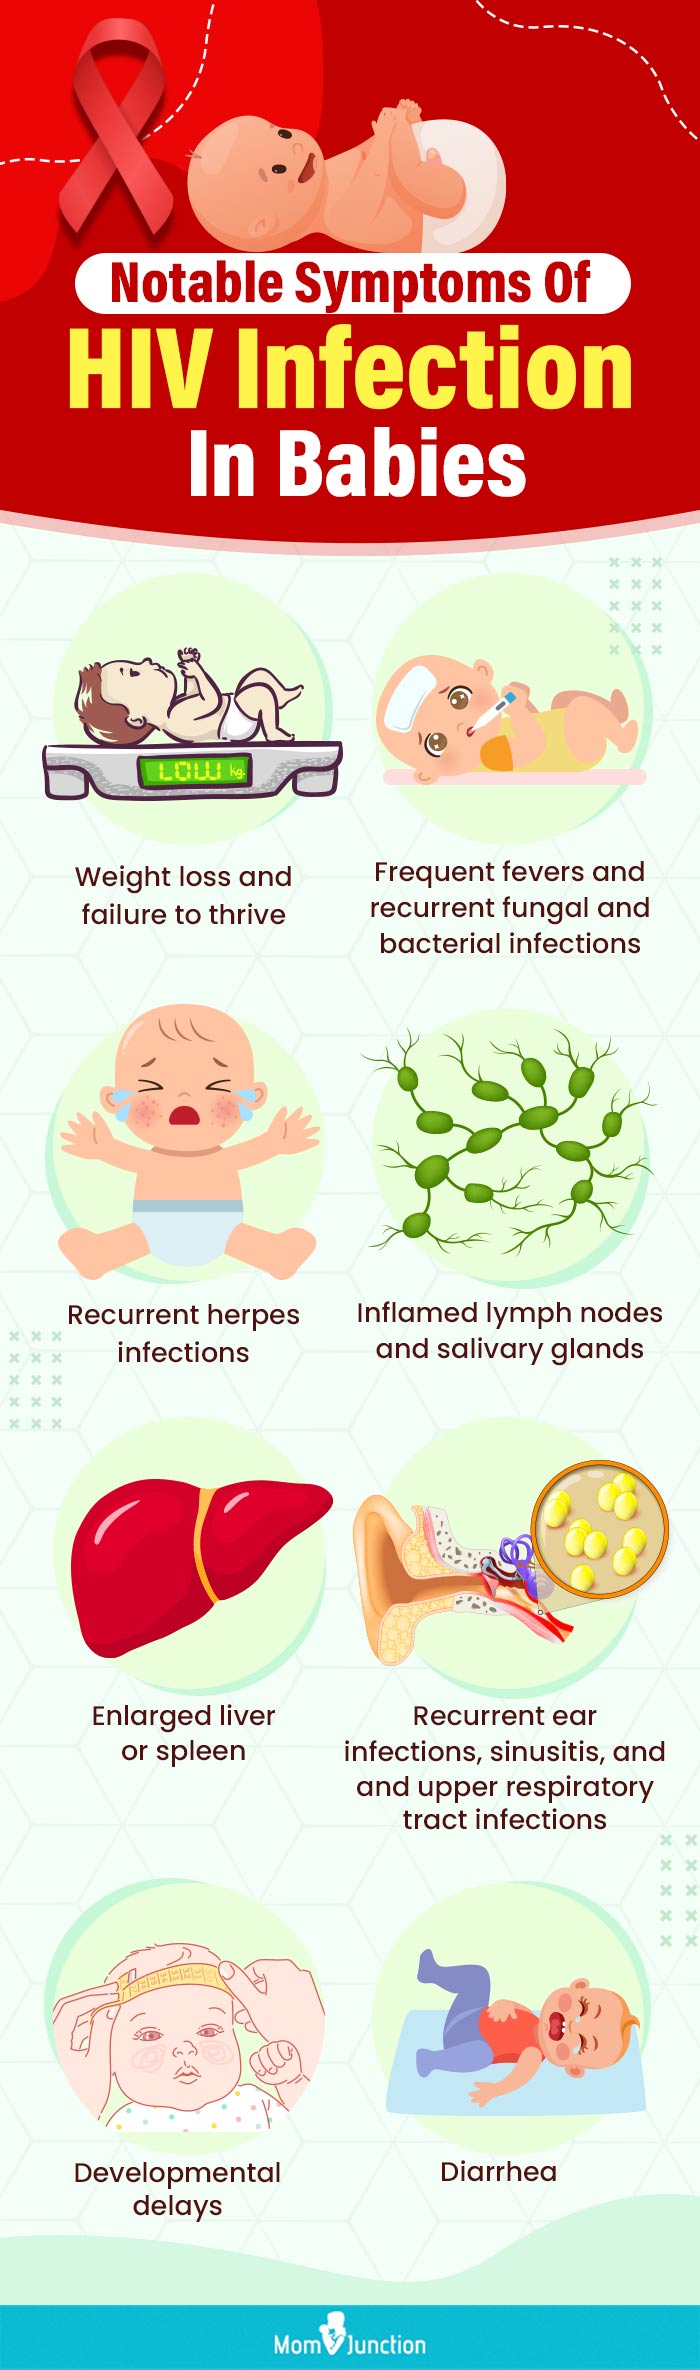 notable symptoms of hiv infection in babies (infographic)